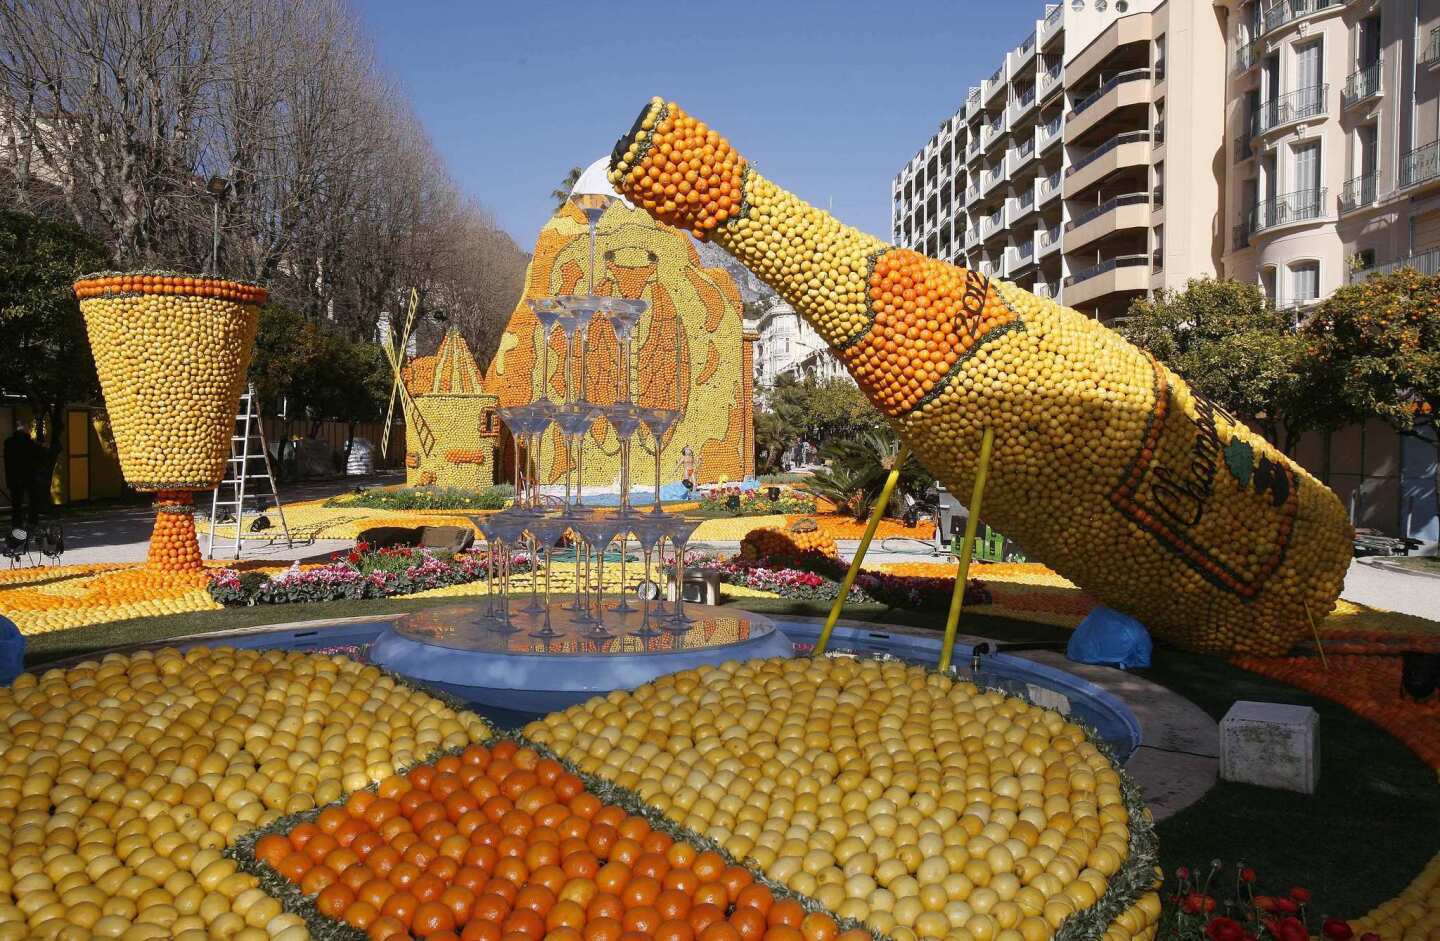 The theme of this year's festival is regions of France. Here, a display pays homage to Champagne, situated in northern France.